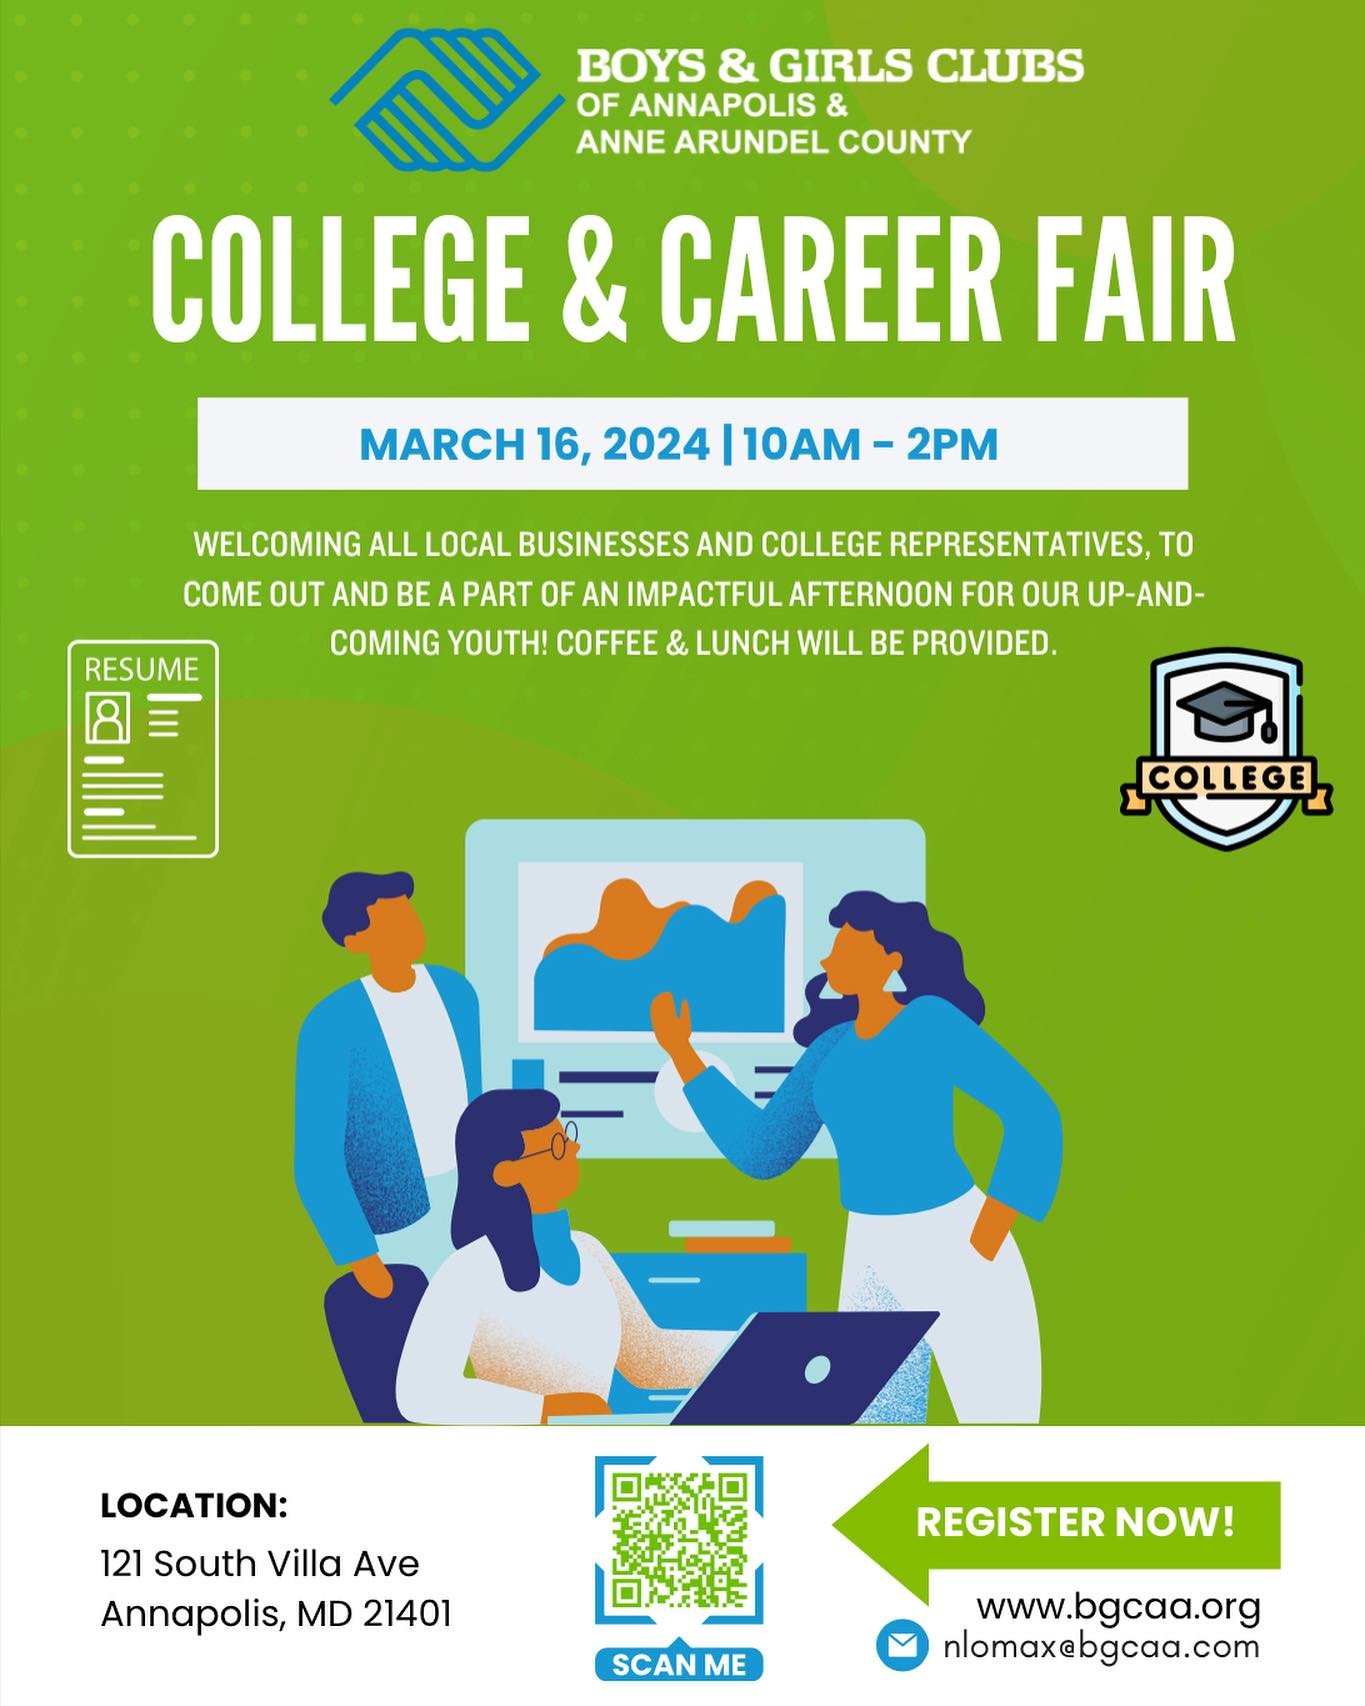 Our office will be closed today but we hope to see you at @bgcaa_ &lsquo;s college fair today! We have lots of events this for you to come out and support EWR and your community. Keep an eye out for details all week and see you soon!